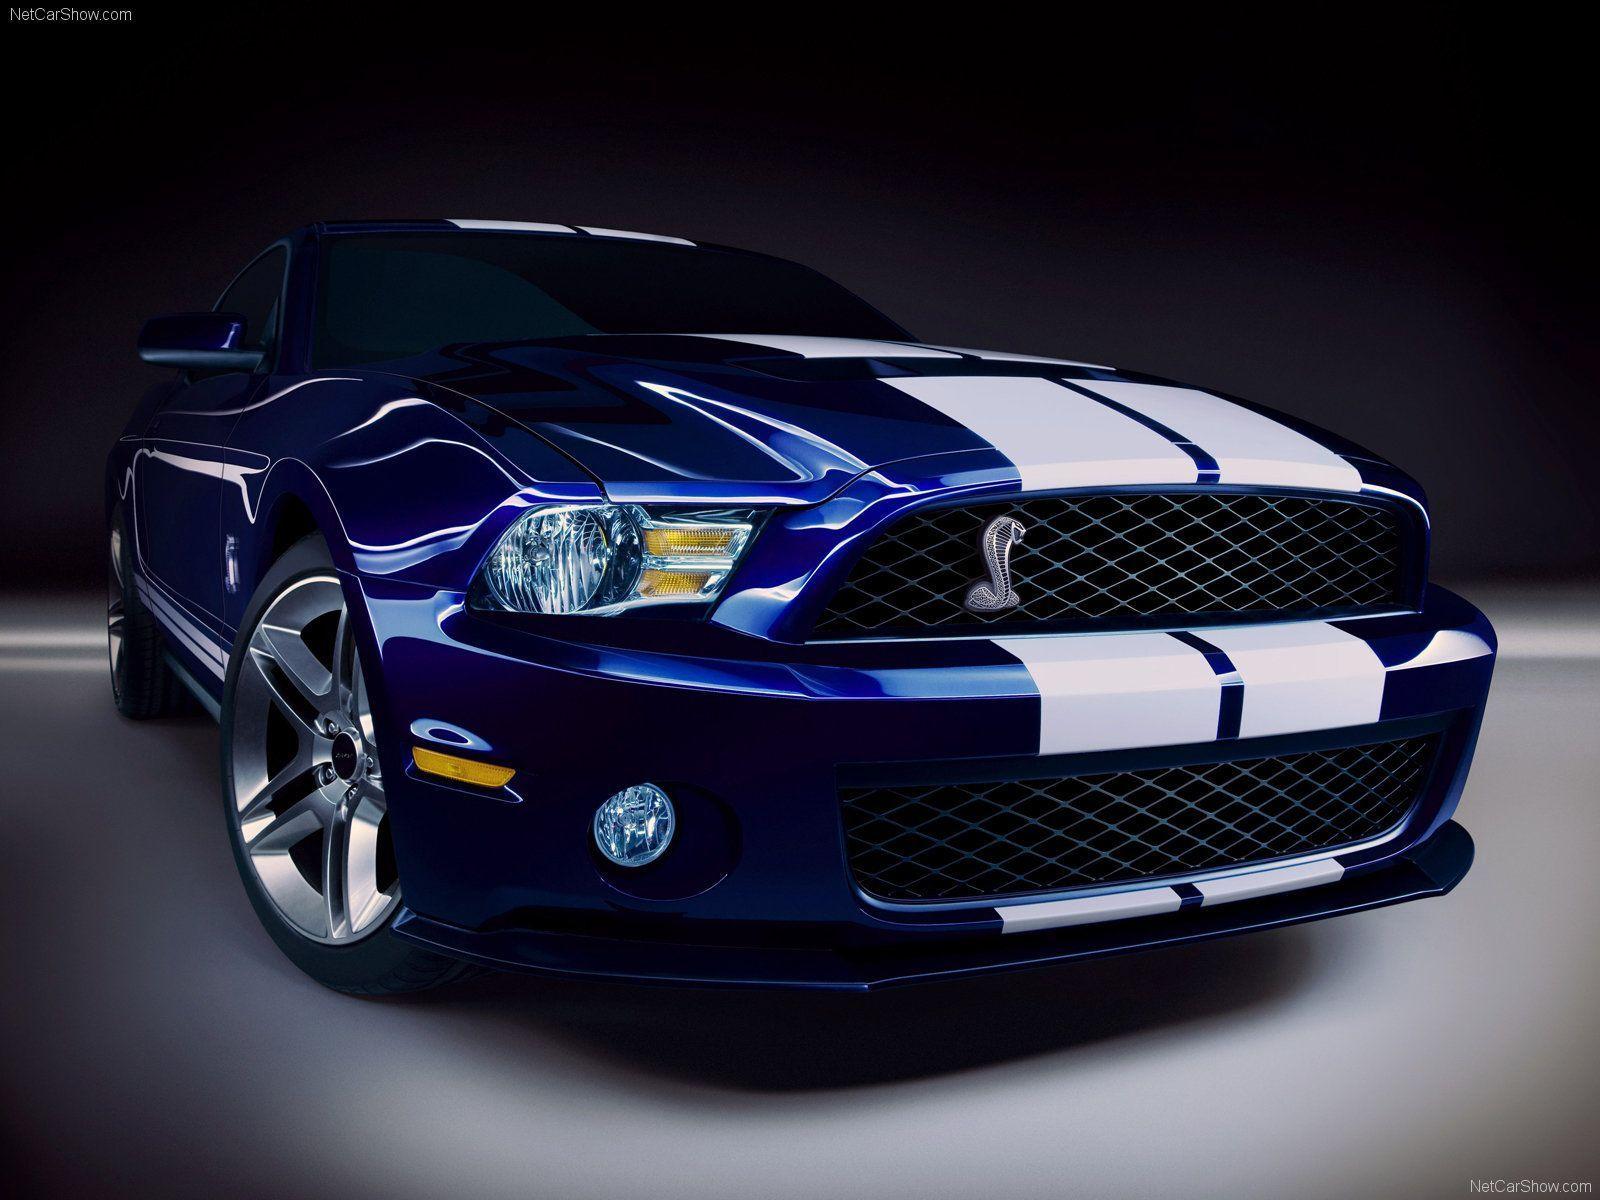 Ford Mustang Wallpaper, Ford Mustang Shelby Gt Wallpaper X